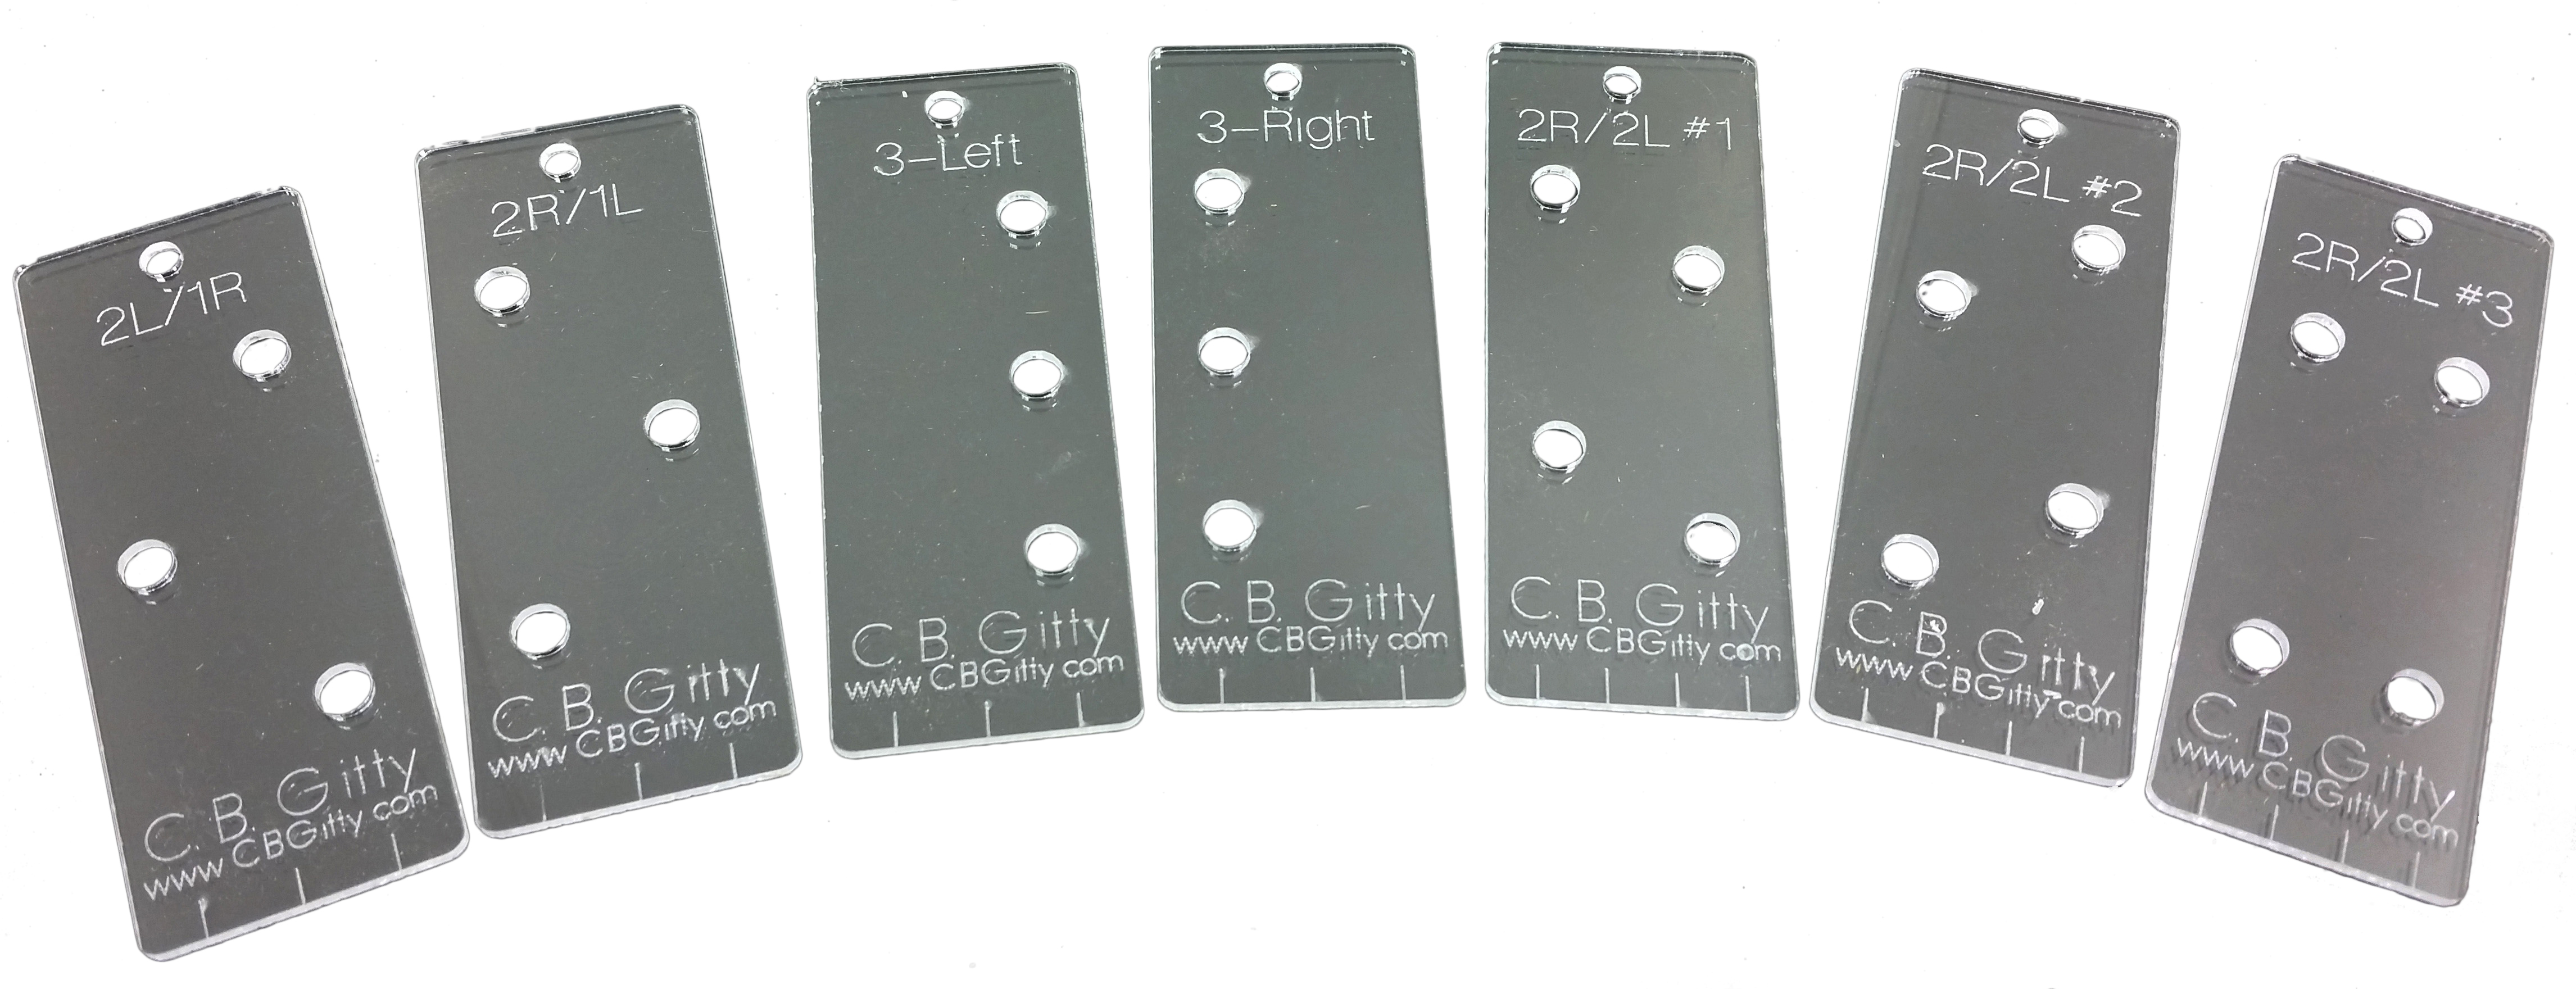 7pc. Cigar Box Guitar Headstock Drilling Templates for 3- and 4-string CBGs - include string spacing guides